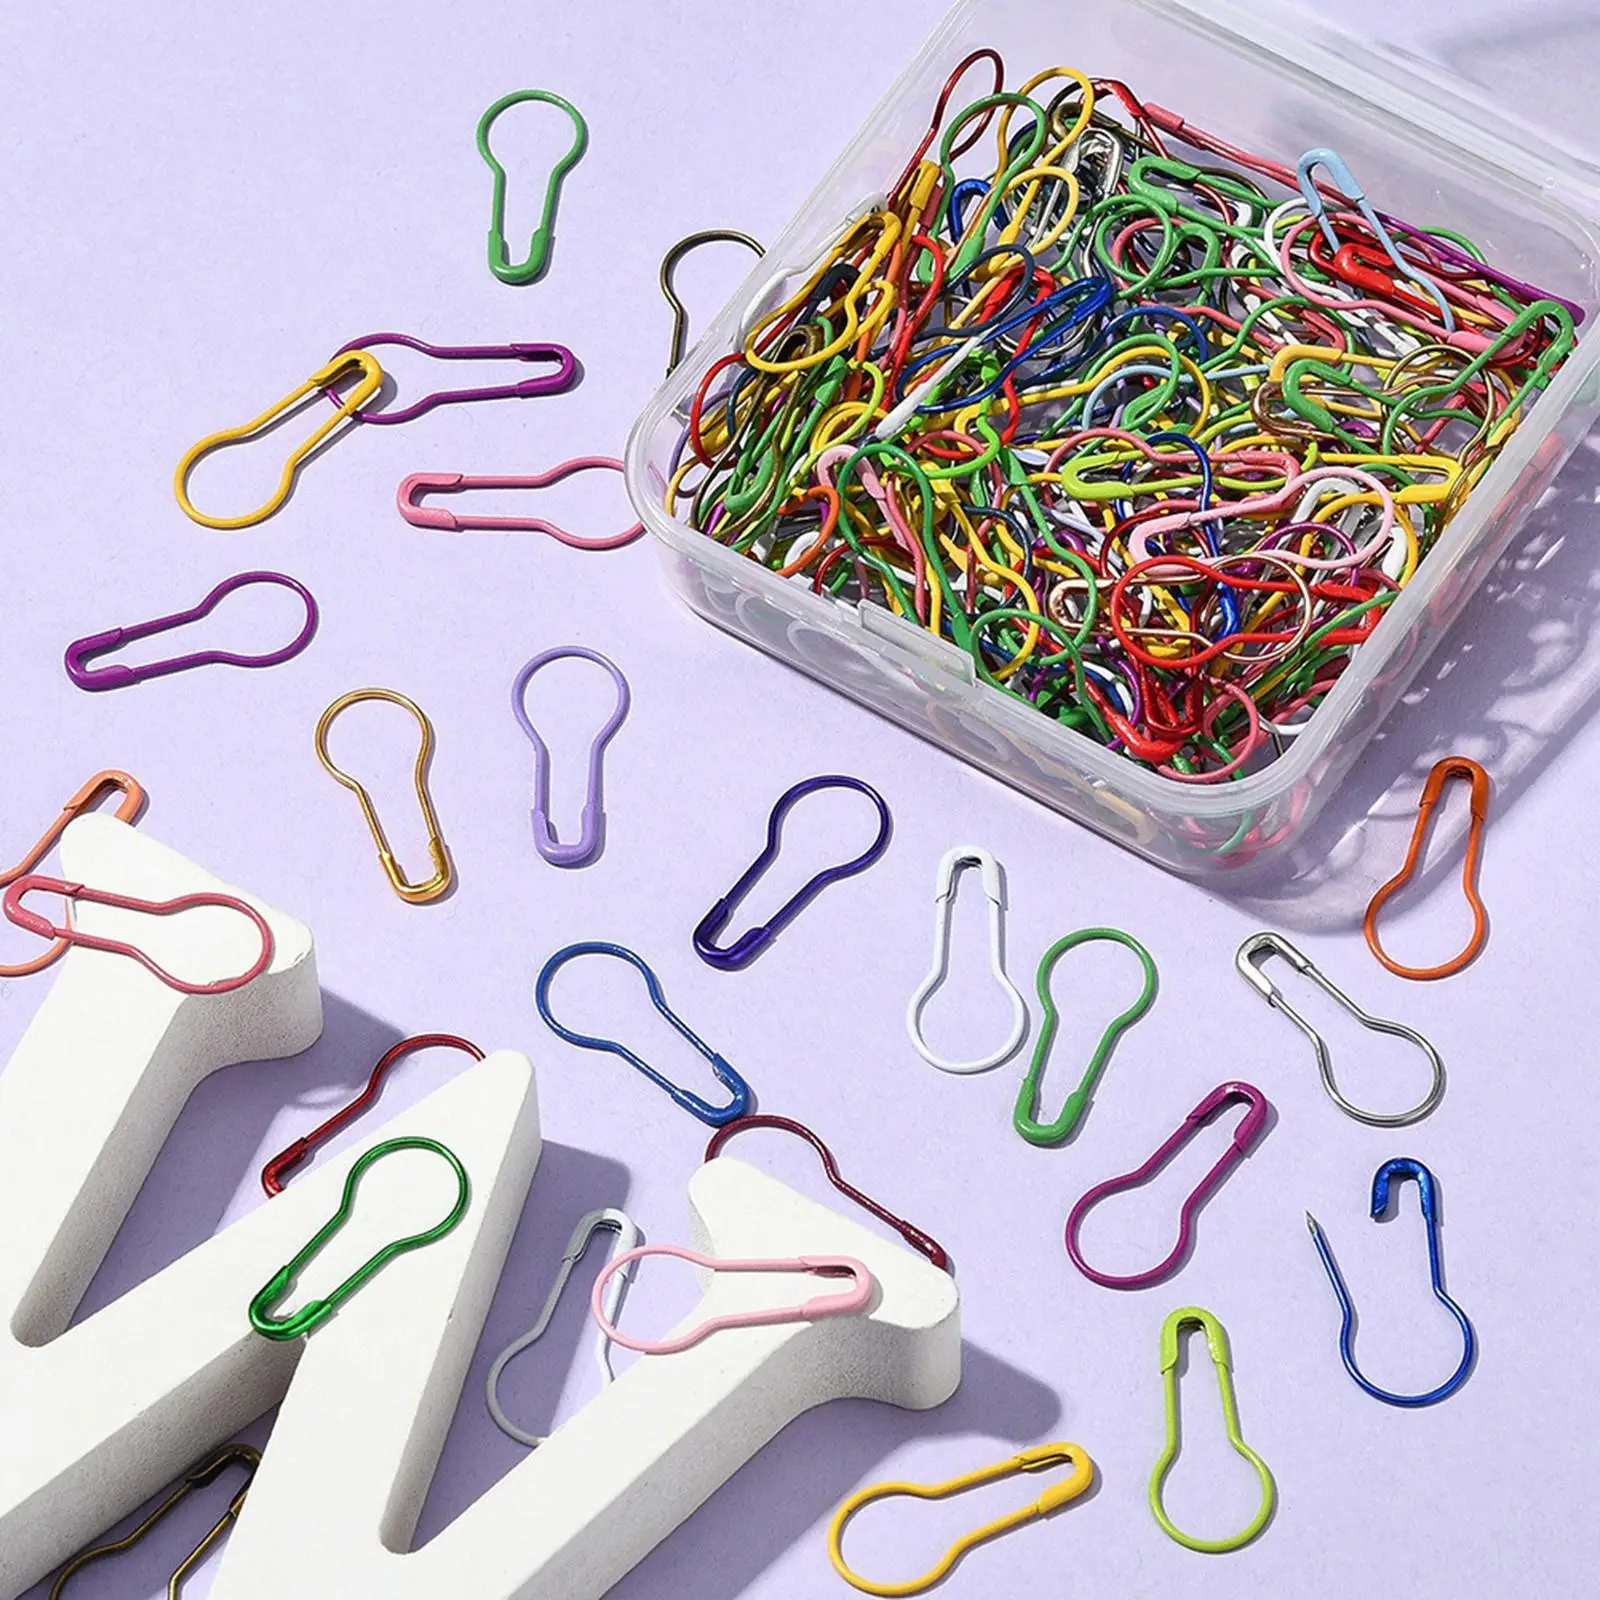 200x Safety Pins Knitting Quilting Crochet Storage Box Bulb Stitch Markers for Blanket Clothes Crocheting Clothing Tag Making